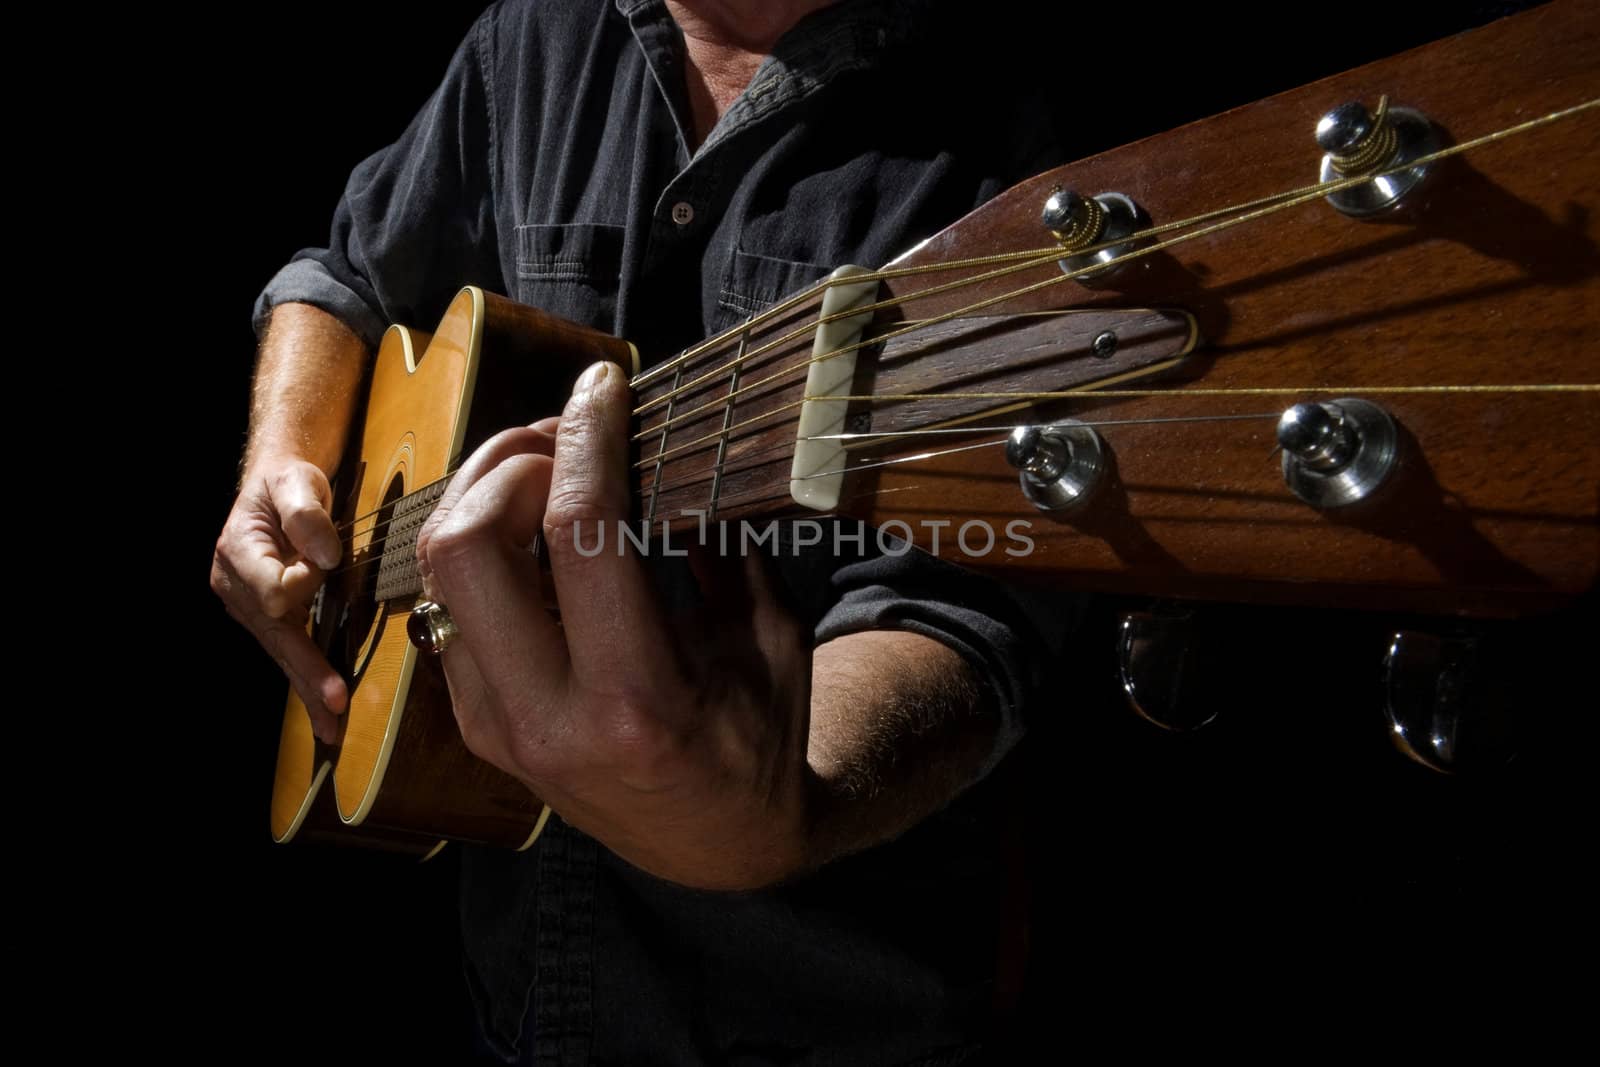 Wide angle photo of a musician playing an acoustic guitar.